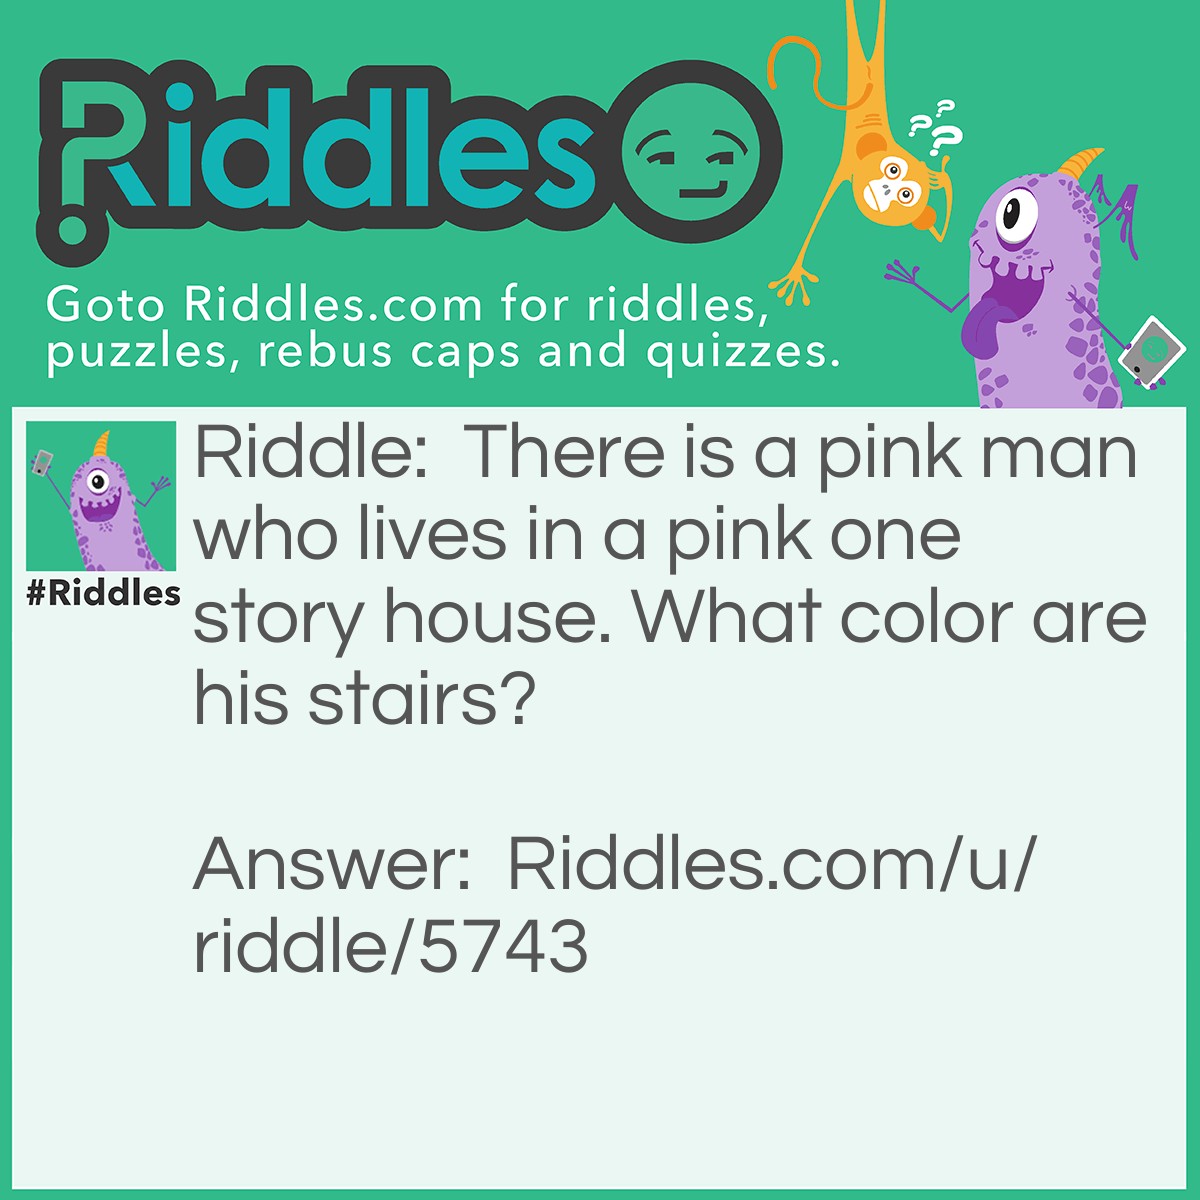 Riddle: There is a pink man who lives in a pink one story house. What color are his stairs? Answer: He doesn't have stairs